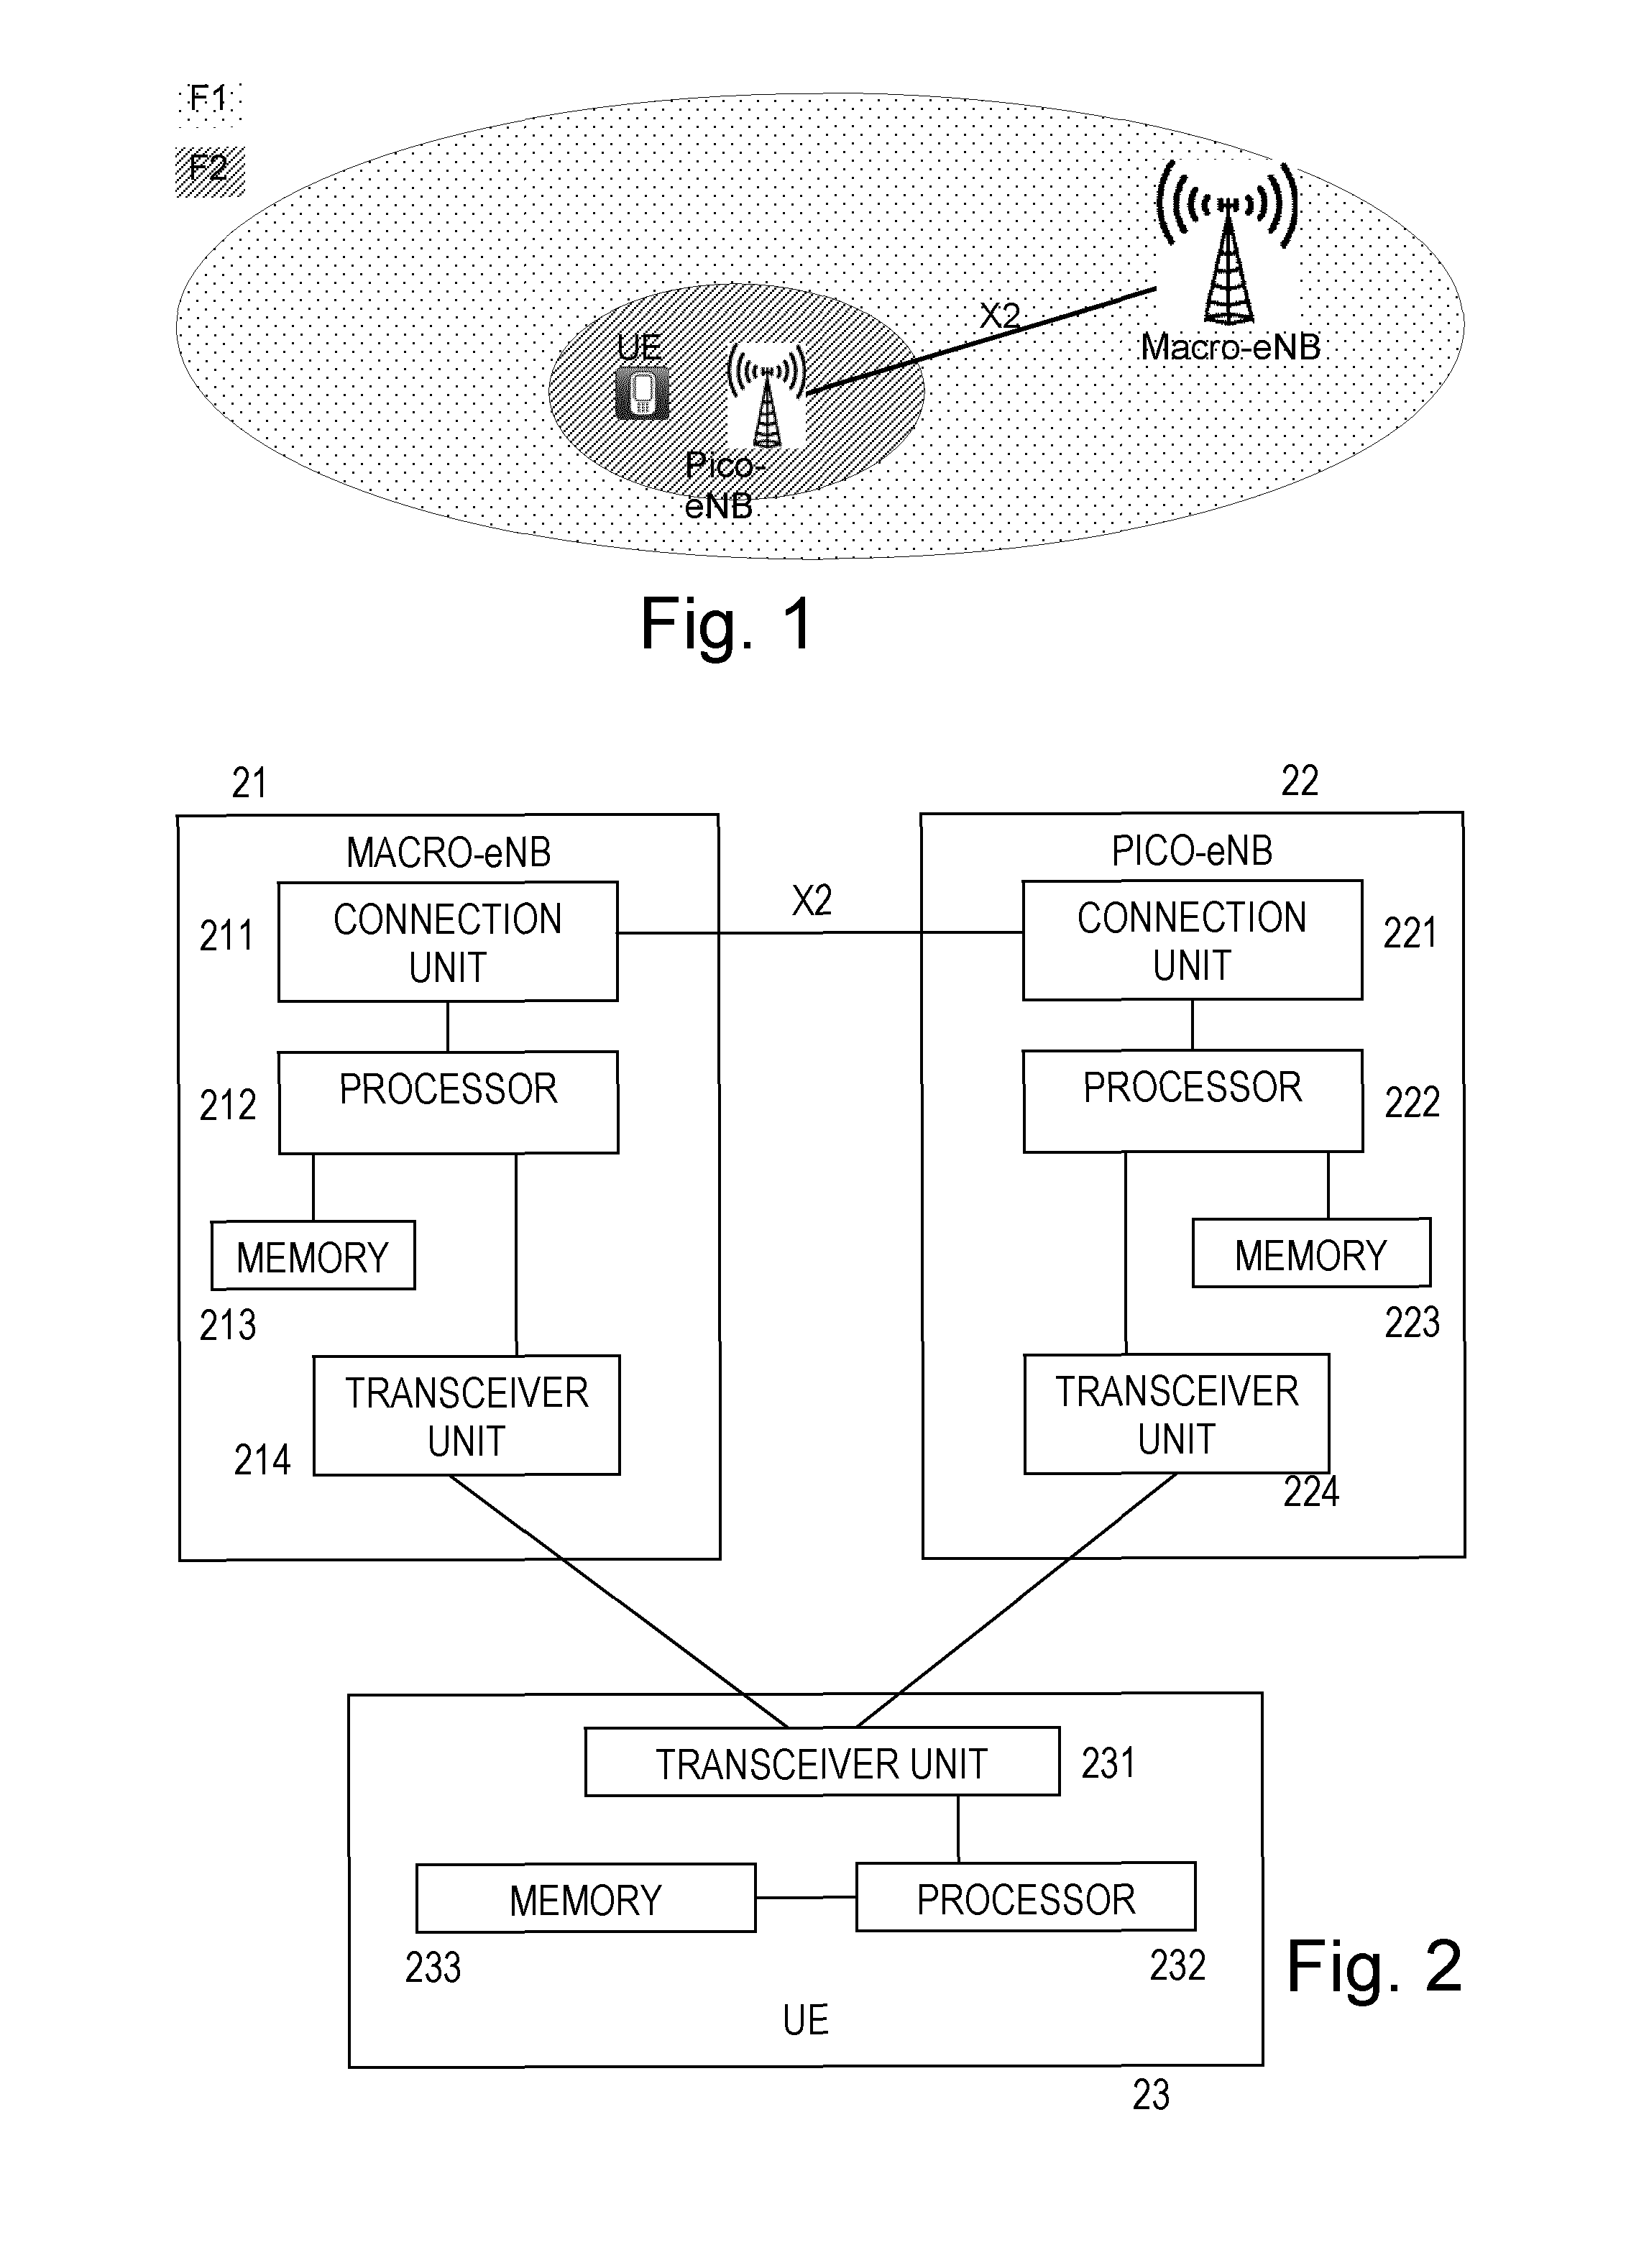 Secondary Cell Preparation for Inter-Site Carrier Aggregation